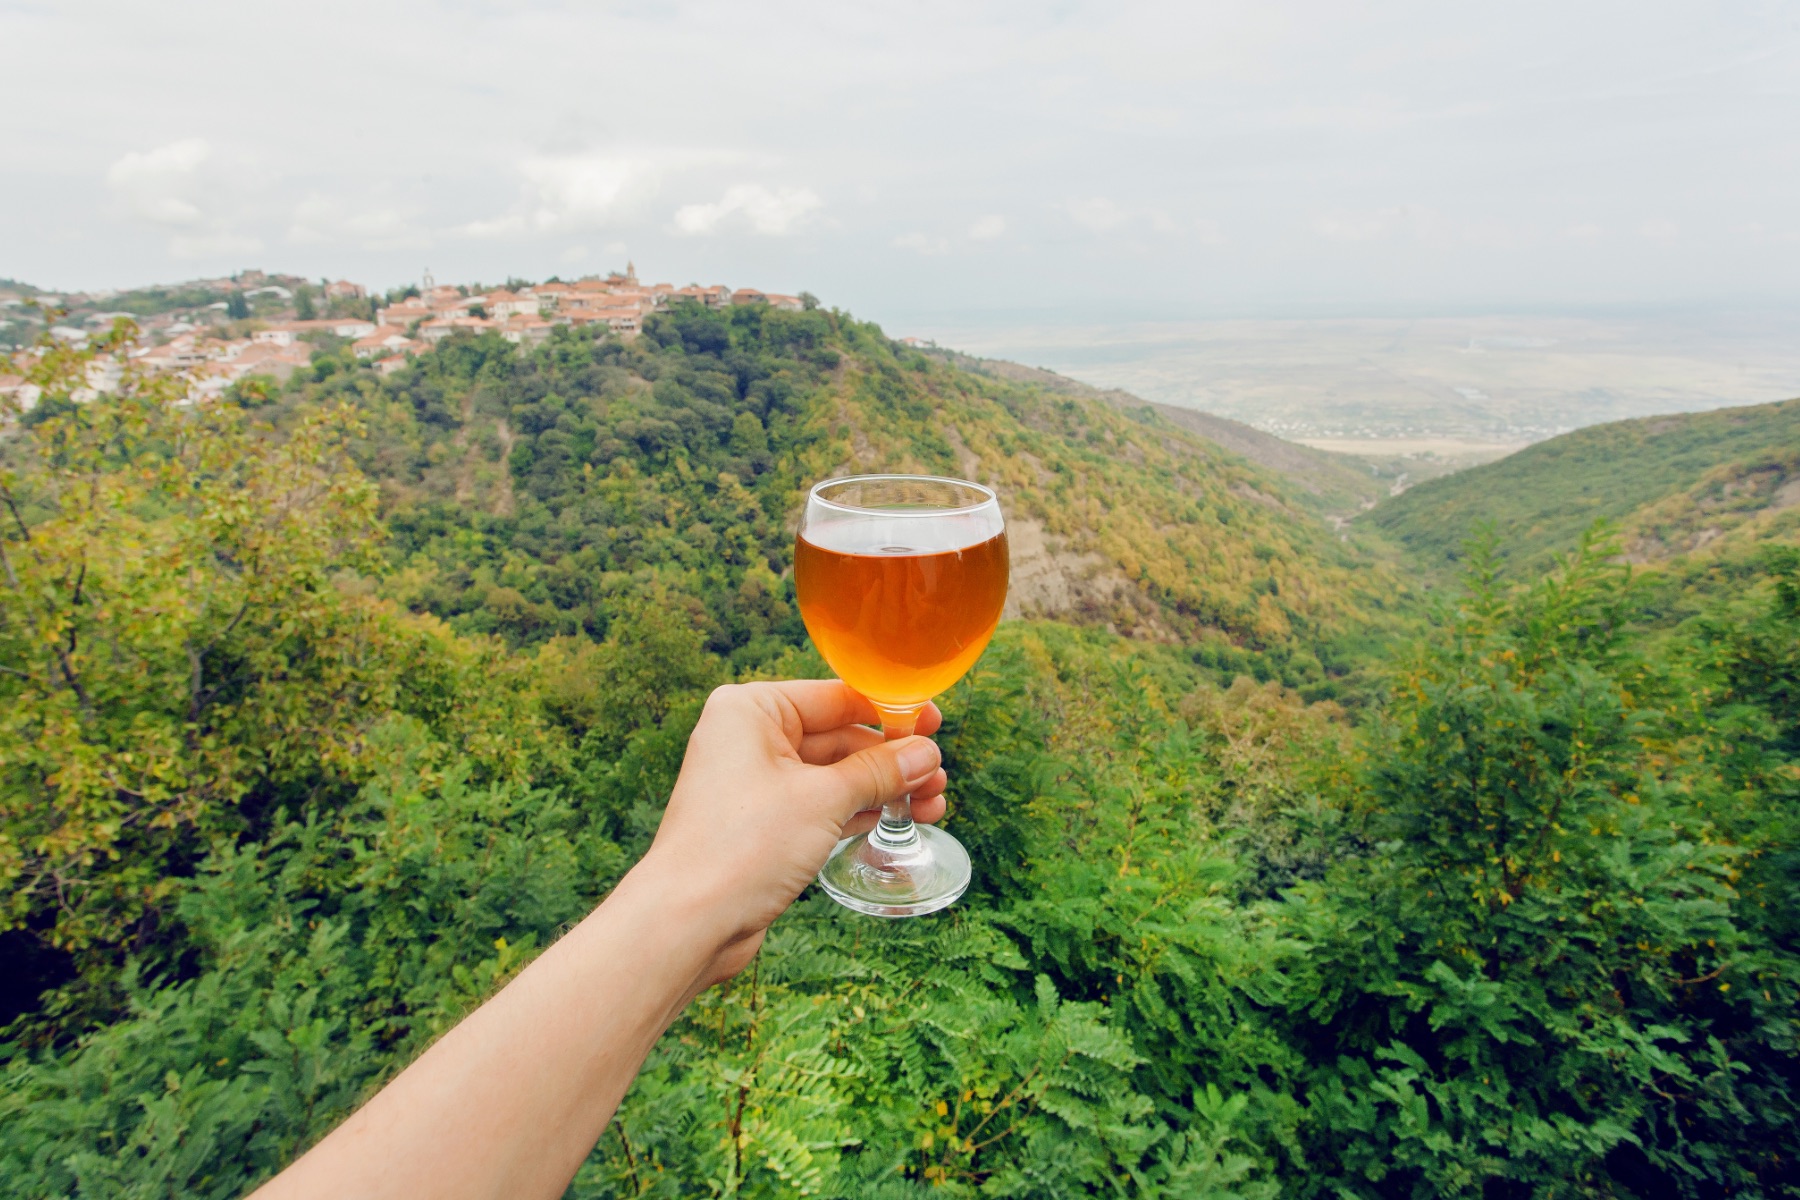 Someone holds a glass of blush wine out in front of them from a vista point; behind the glass is lush hills and green mountains.